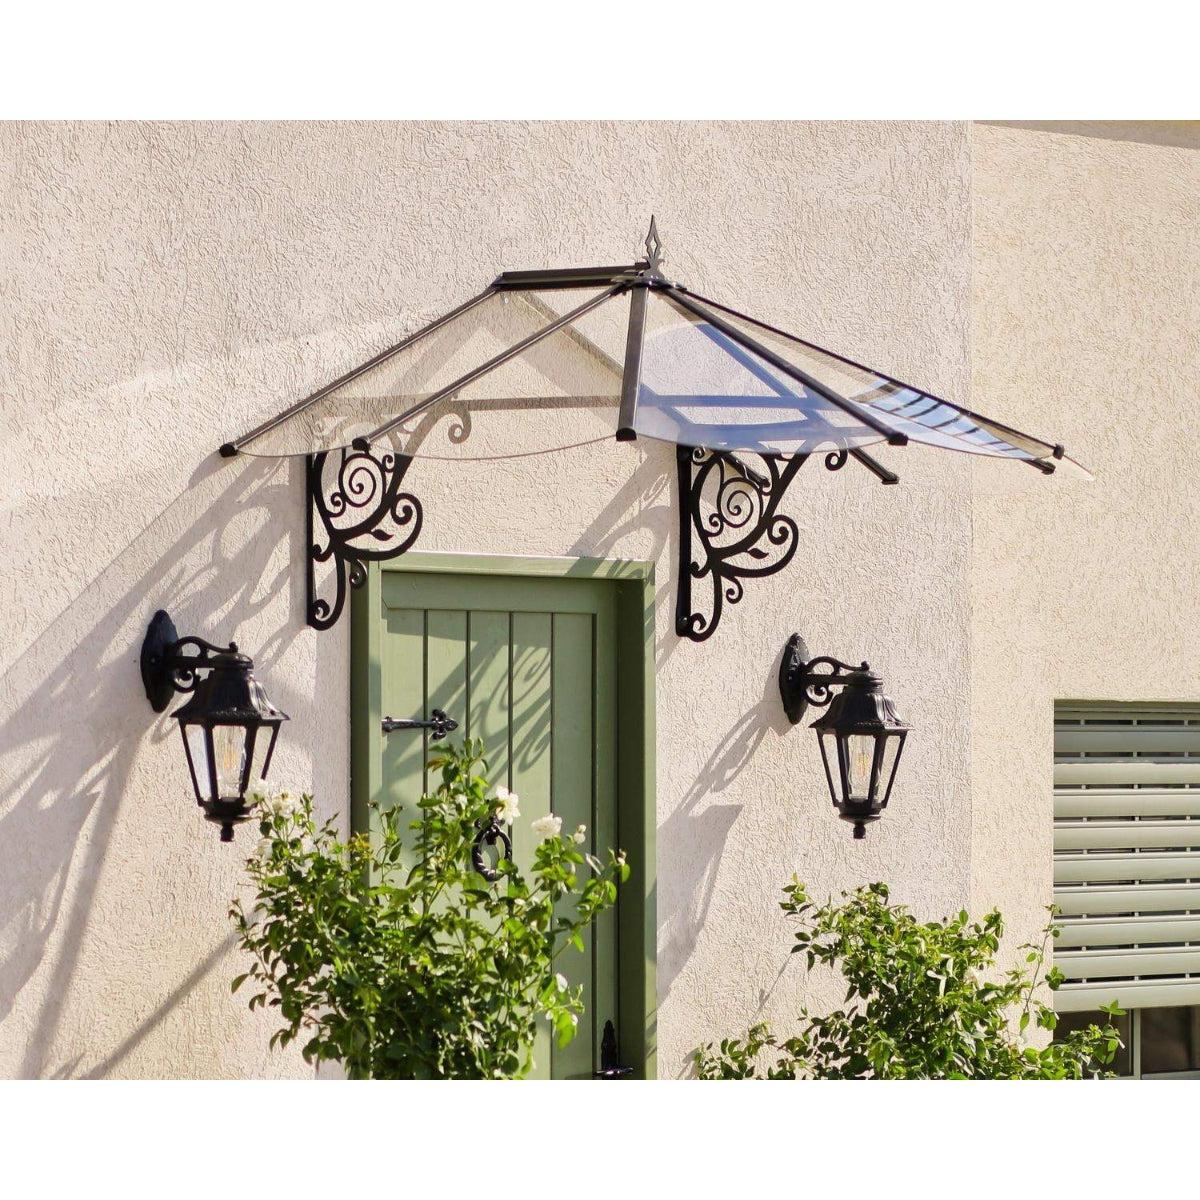 Lily 1780 French Door Awning Clear Panel | Palram-Canopia - Delightful Yard